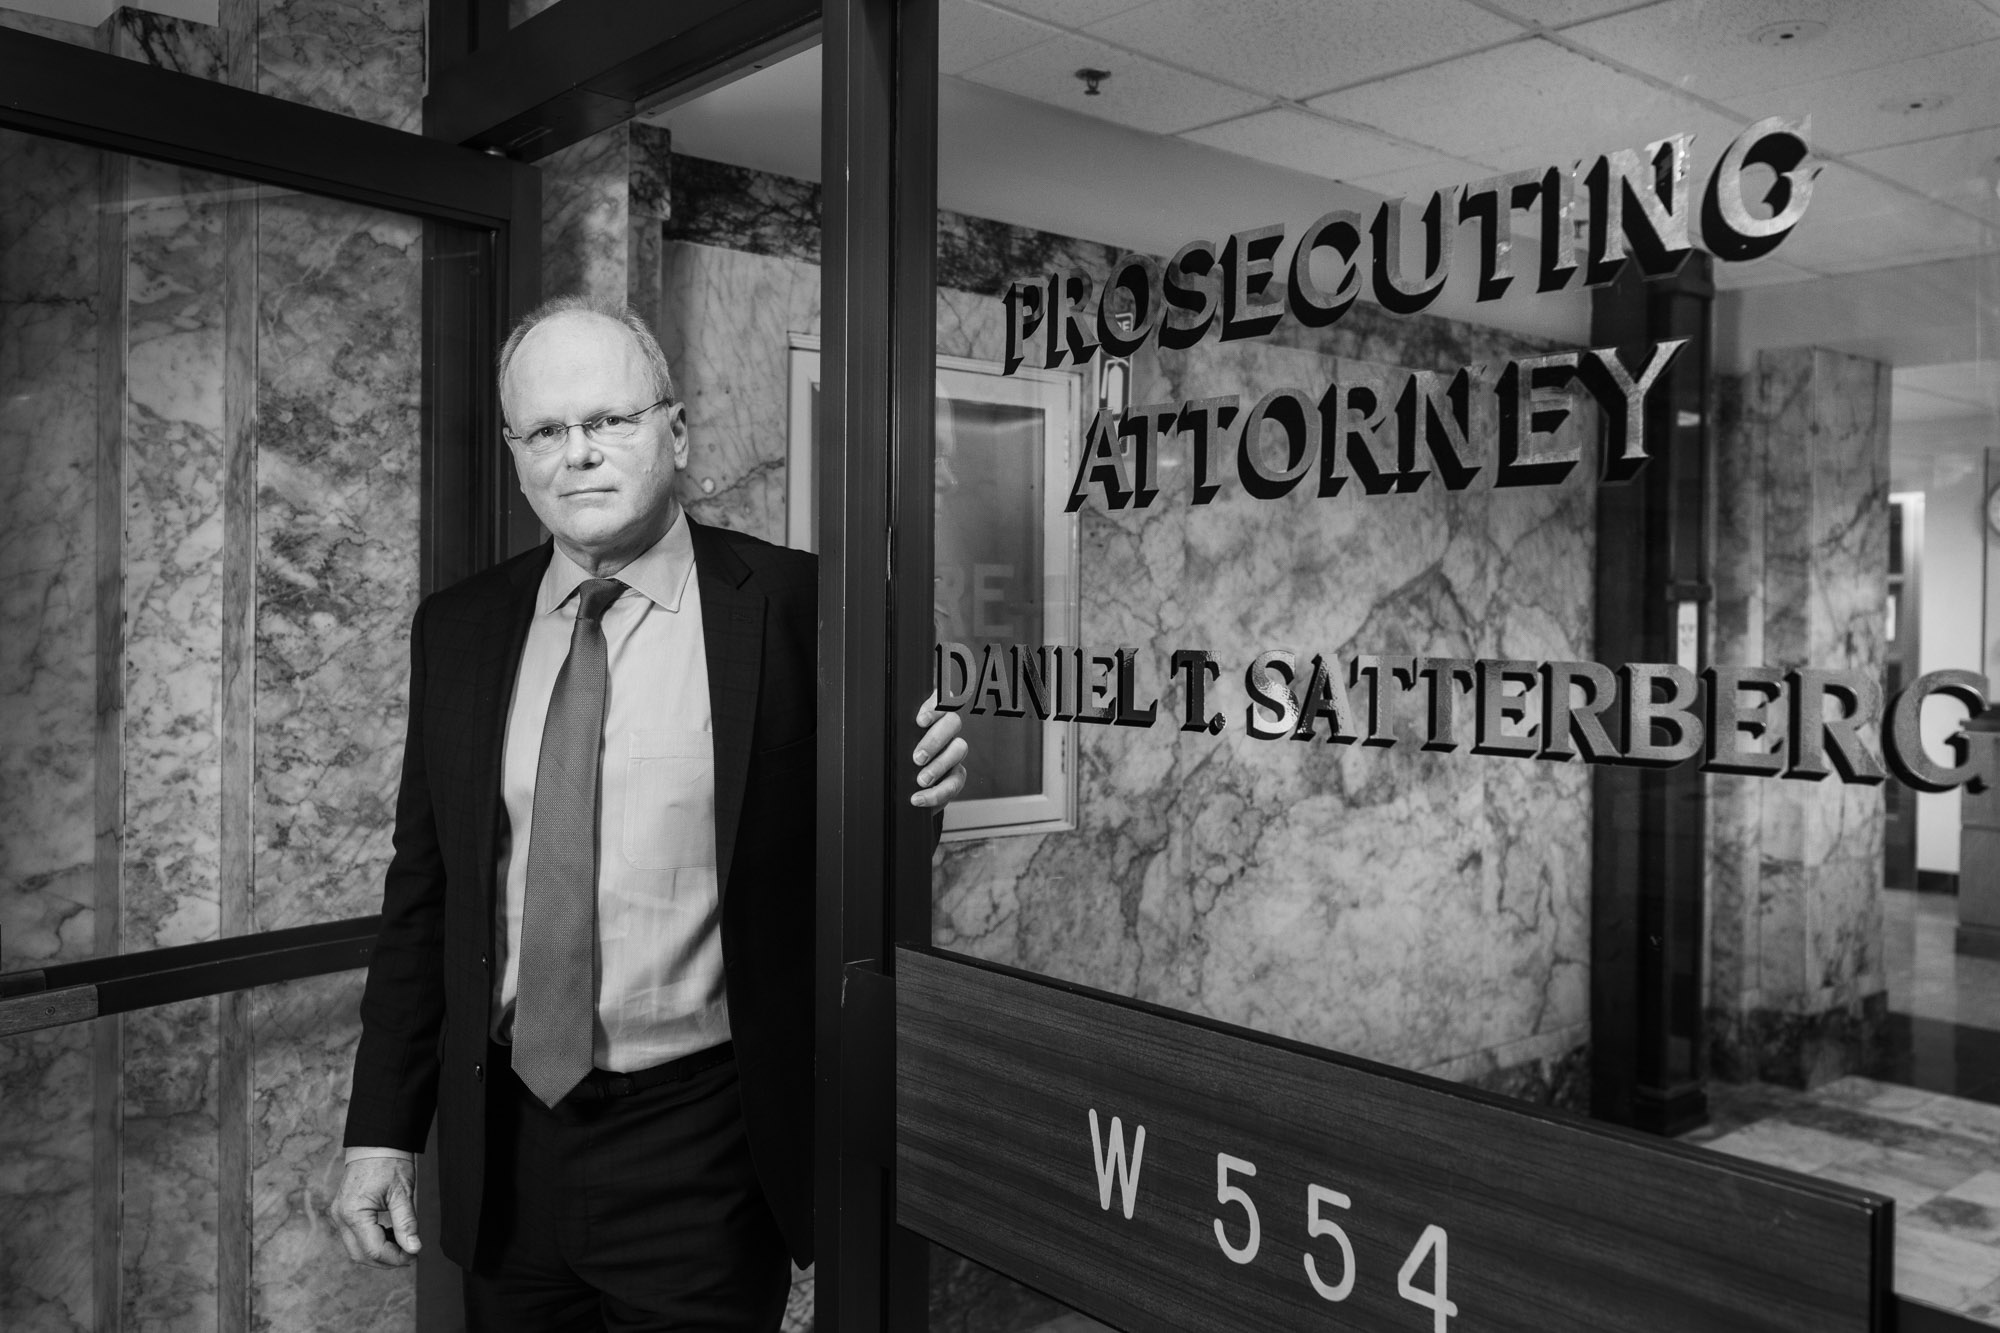 King County Prosecuting Attorney Dan Satterberg photographed in January 2022 in the King County Courthouse in Seattle, Wash.